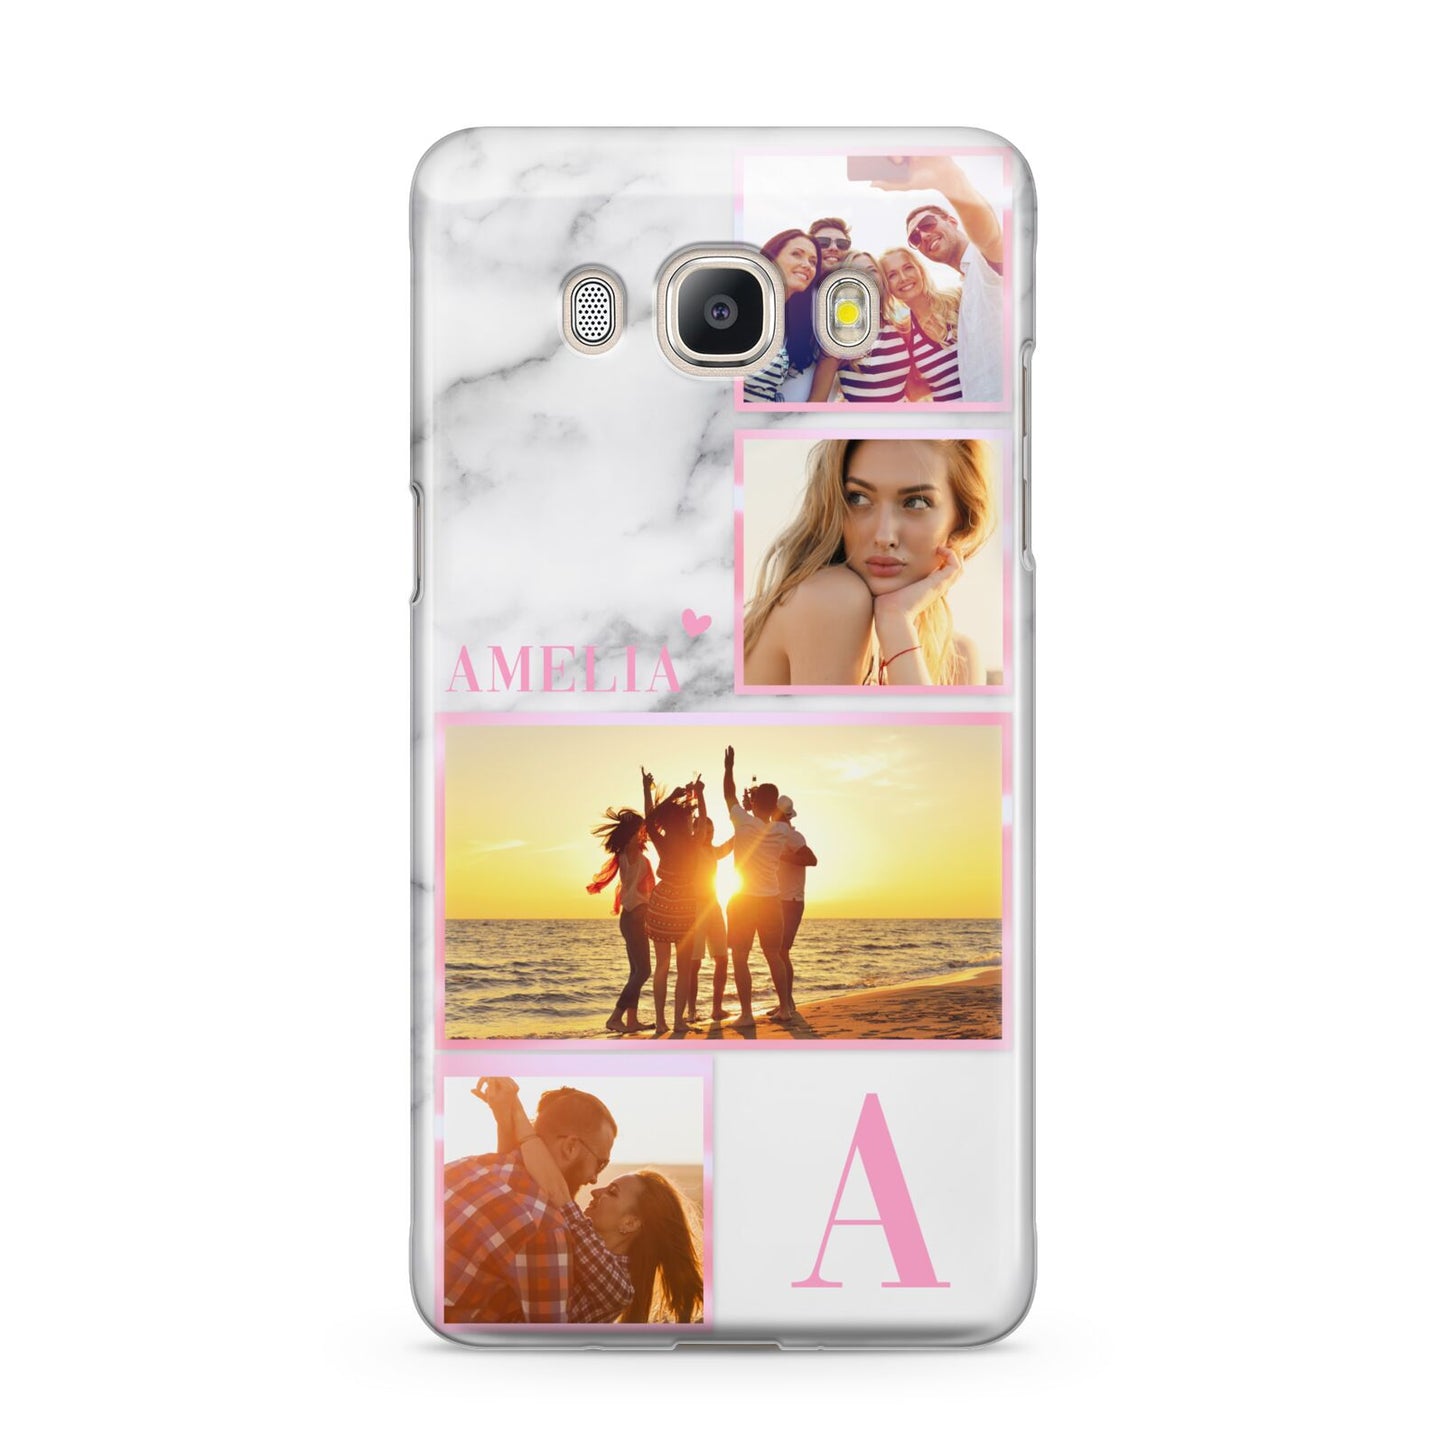 Personalised Marble Photo Collage Samsung Galaxy J5 2016 Case